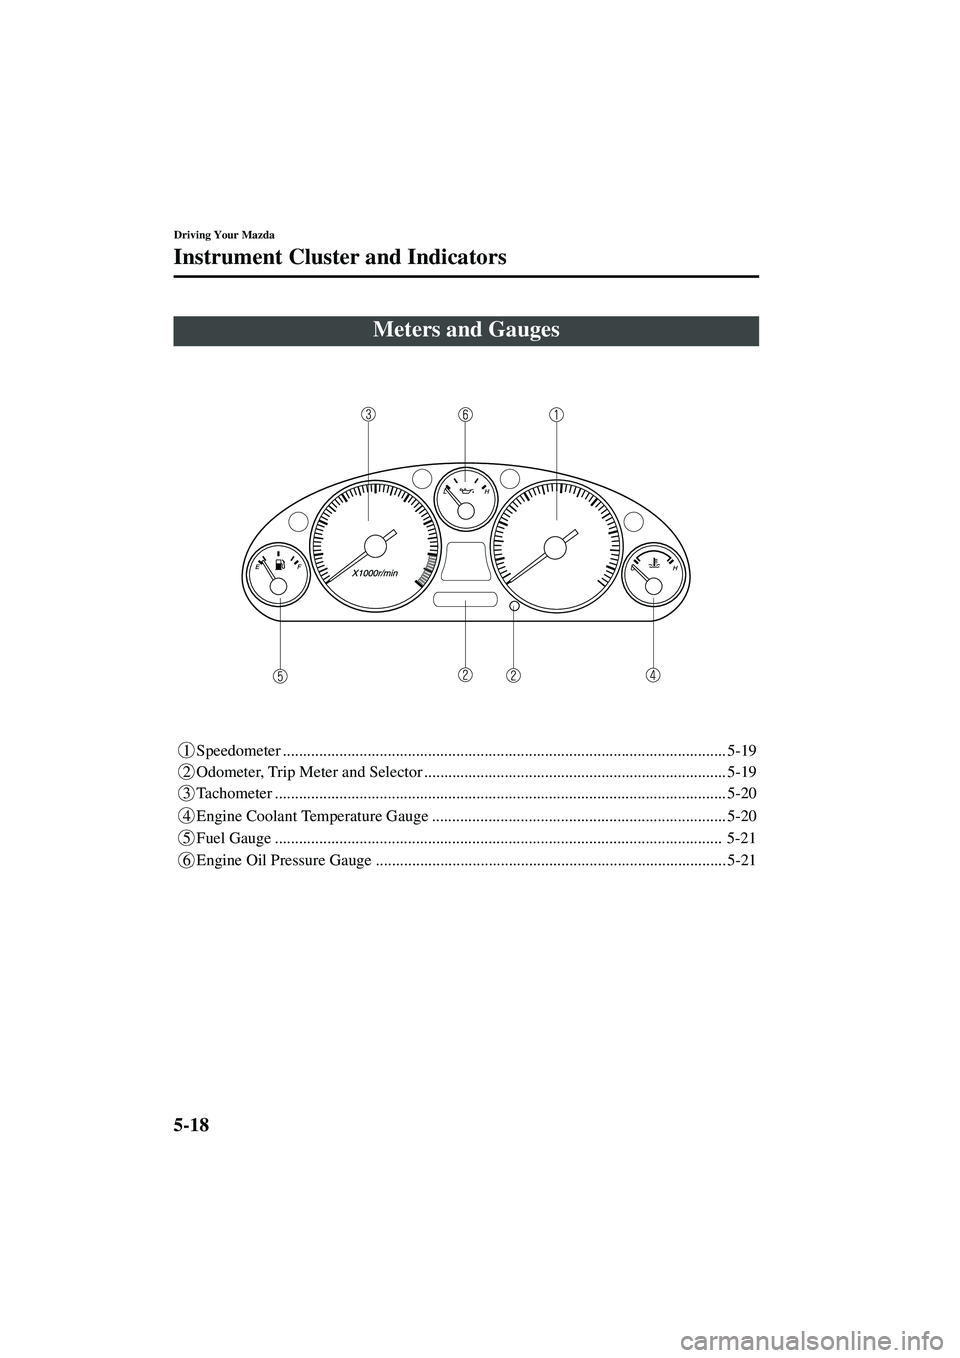 MAZDA MODEL MX-5 MIATA 2004  Owners Manual 5-18
Driving Your Mazda
Form No. 8S15-EA-03G
Instrument Cluster and Indicators
1 Speedometer ...........................................................................................................